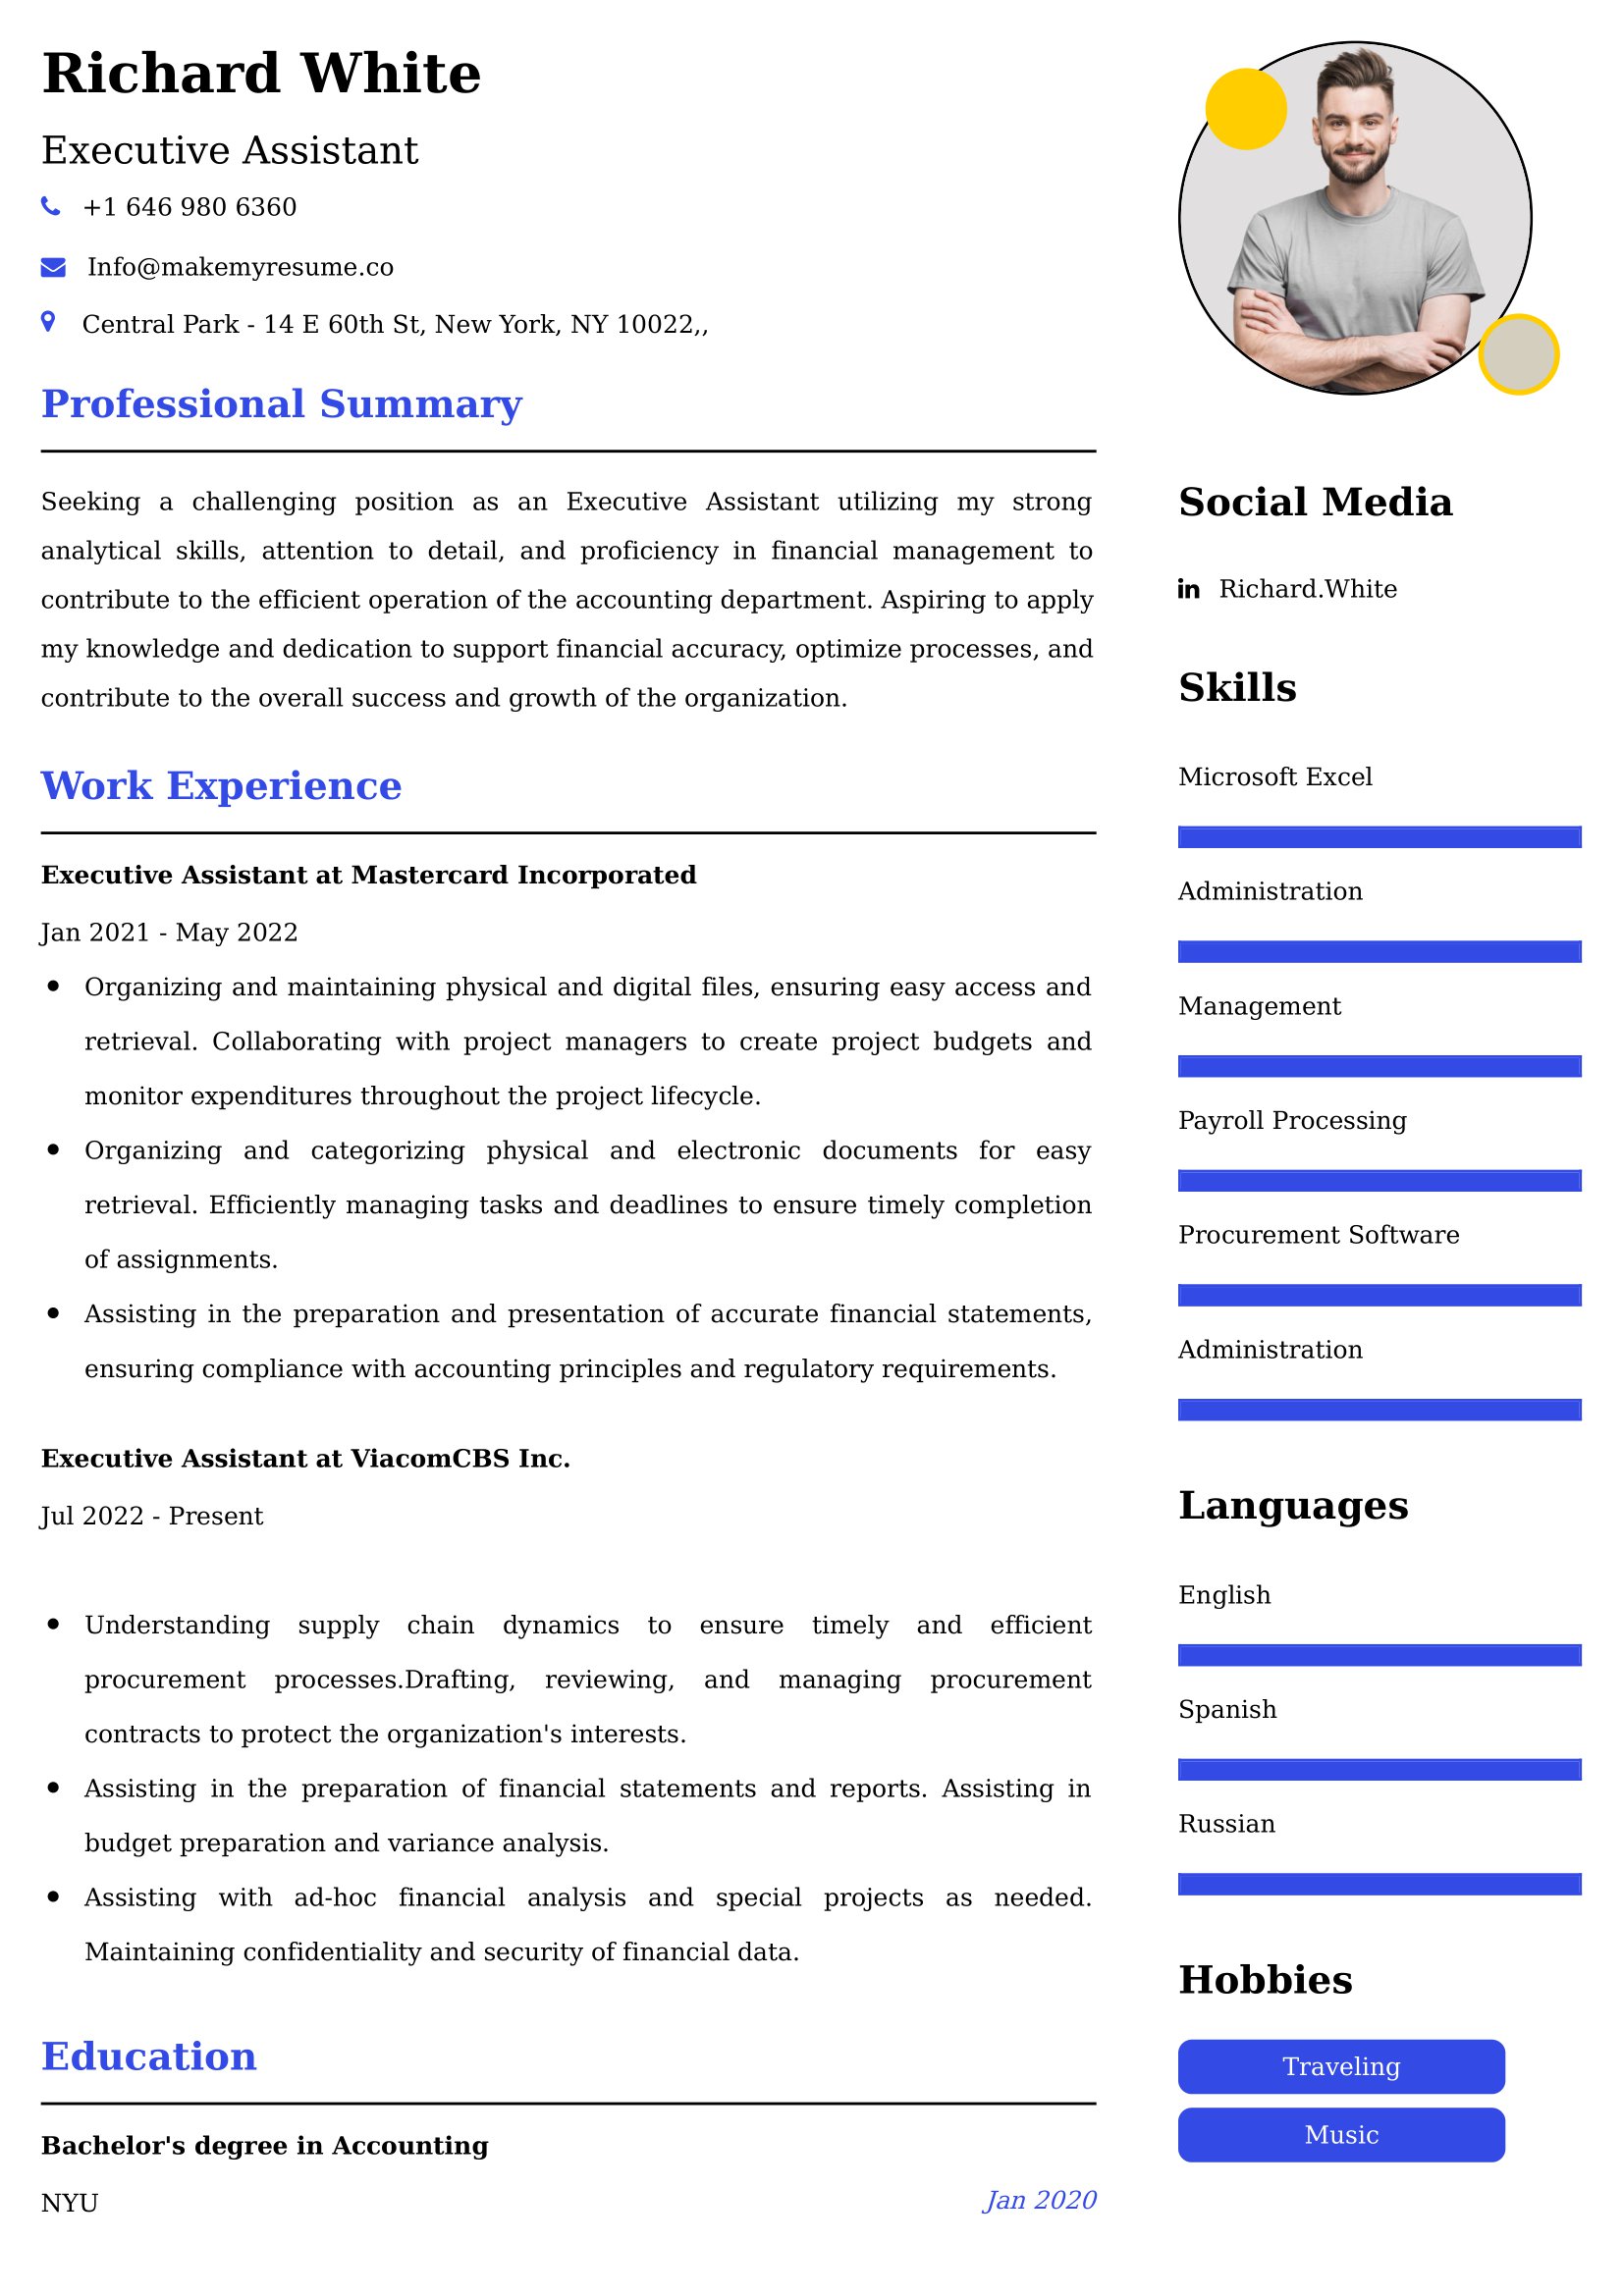 Executive Assistant Resume Examples - UK Format, Latest Template.